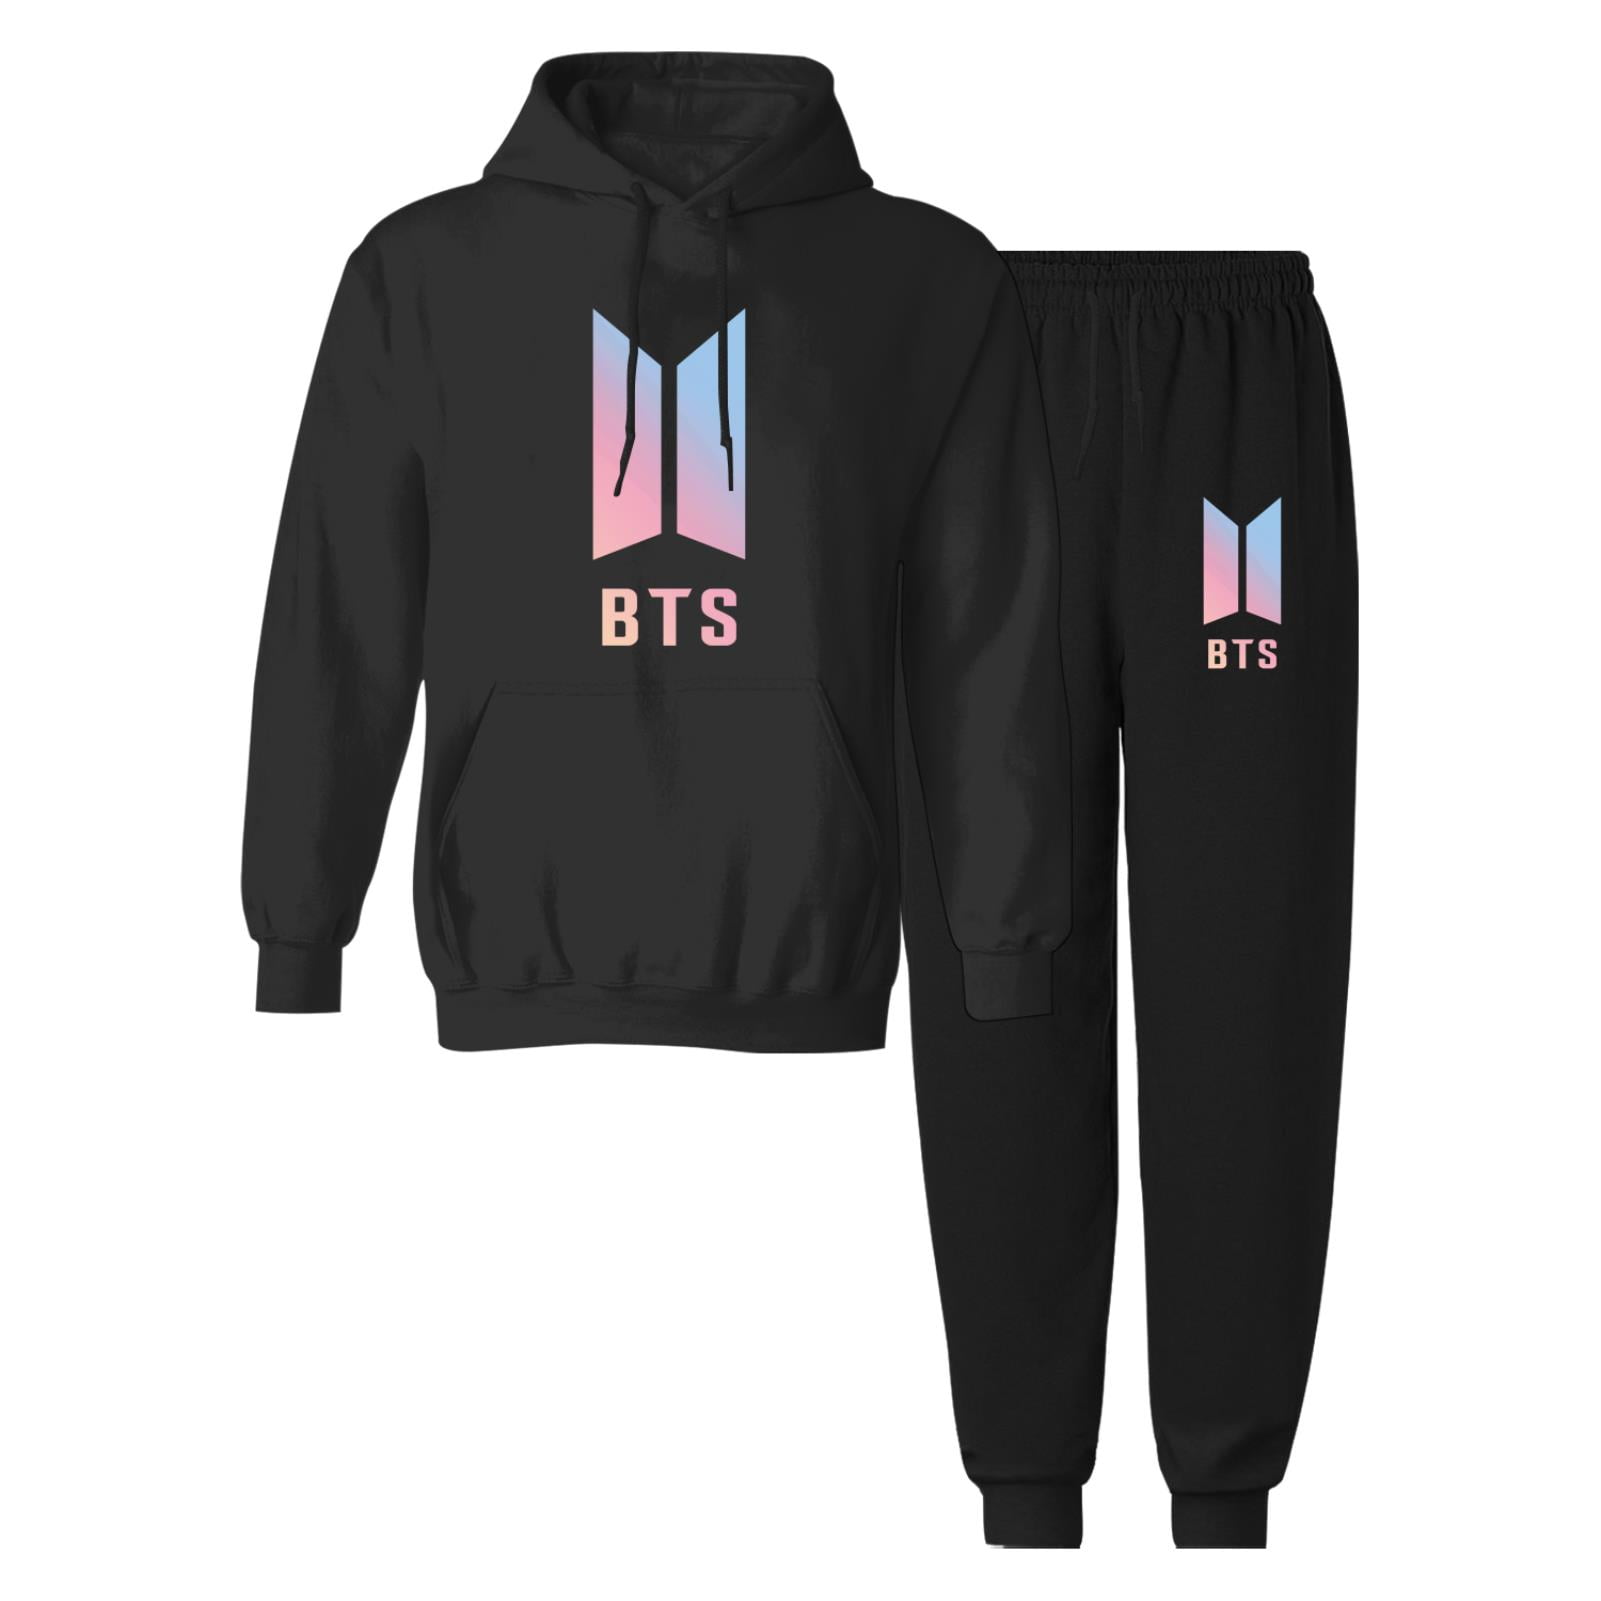 Youth BTS Pullover Hoodie and Sweatpants 2 Piece Outfits Jogging